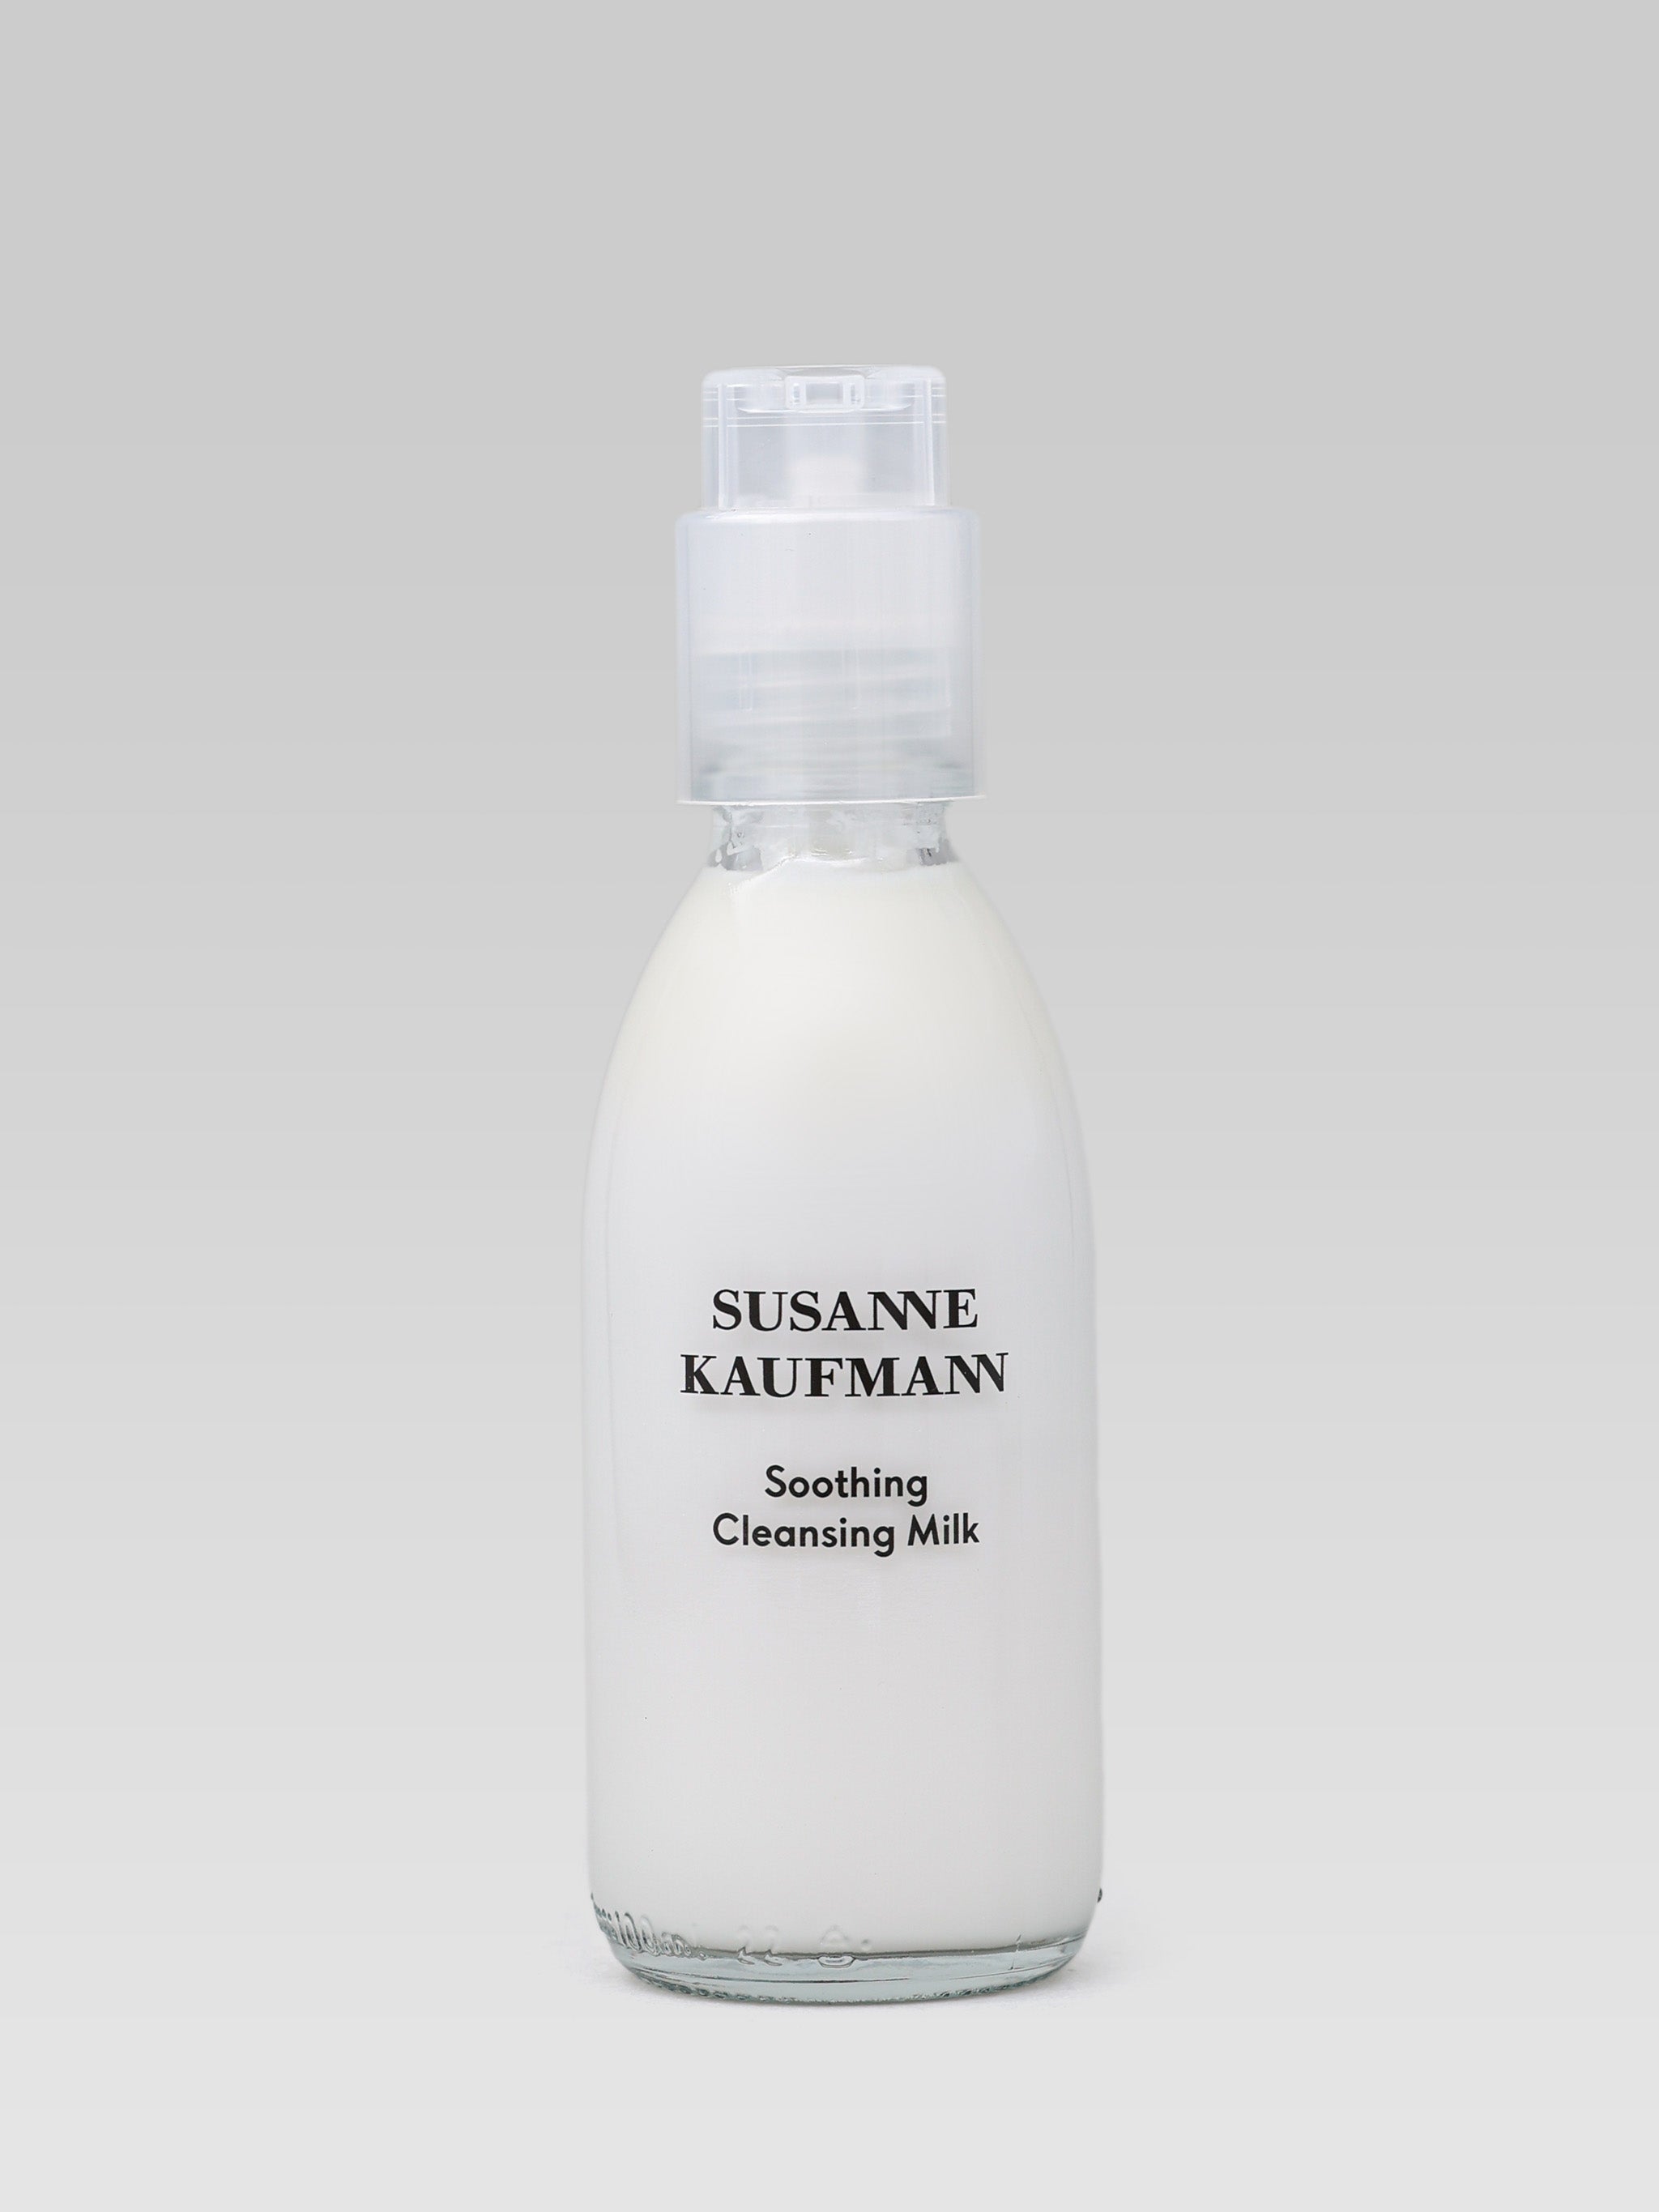 Susanne Kaufmann Soothing Cleansing Milk product shot 